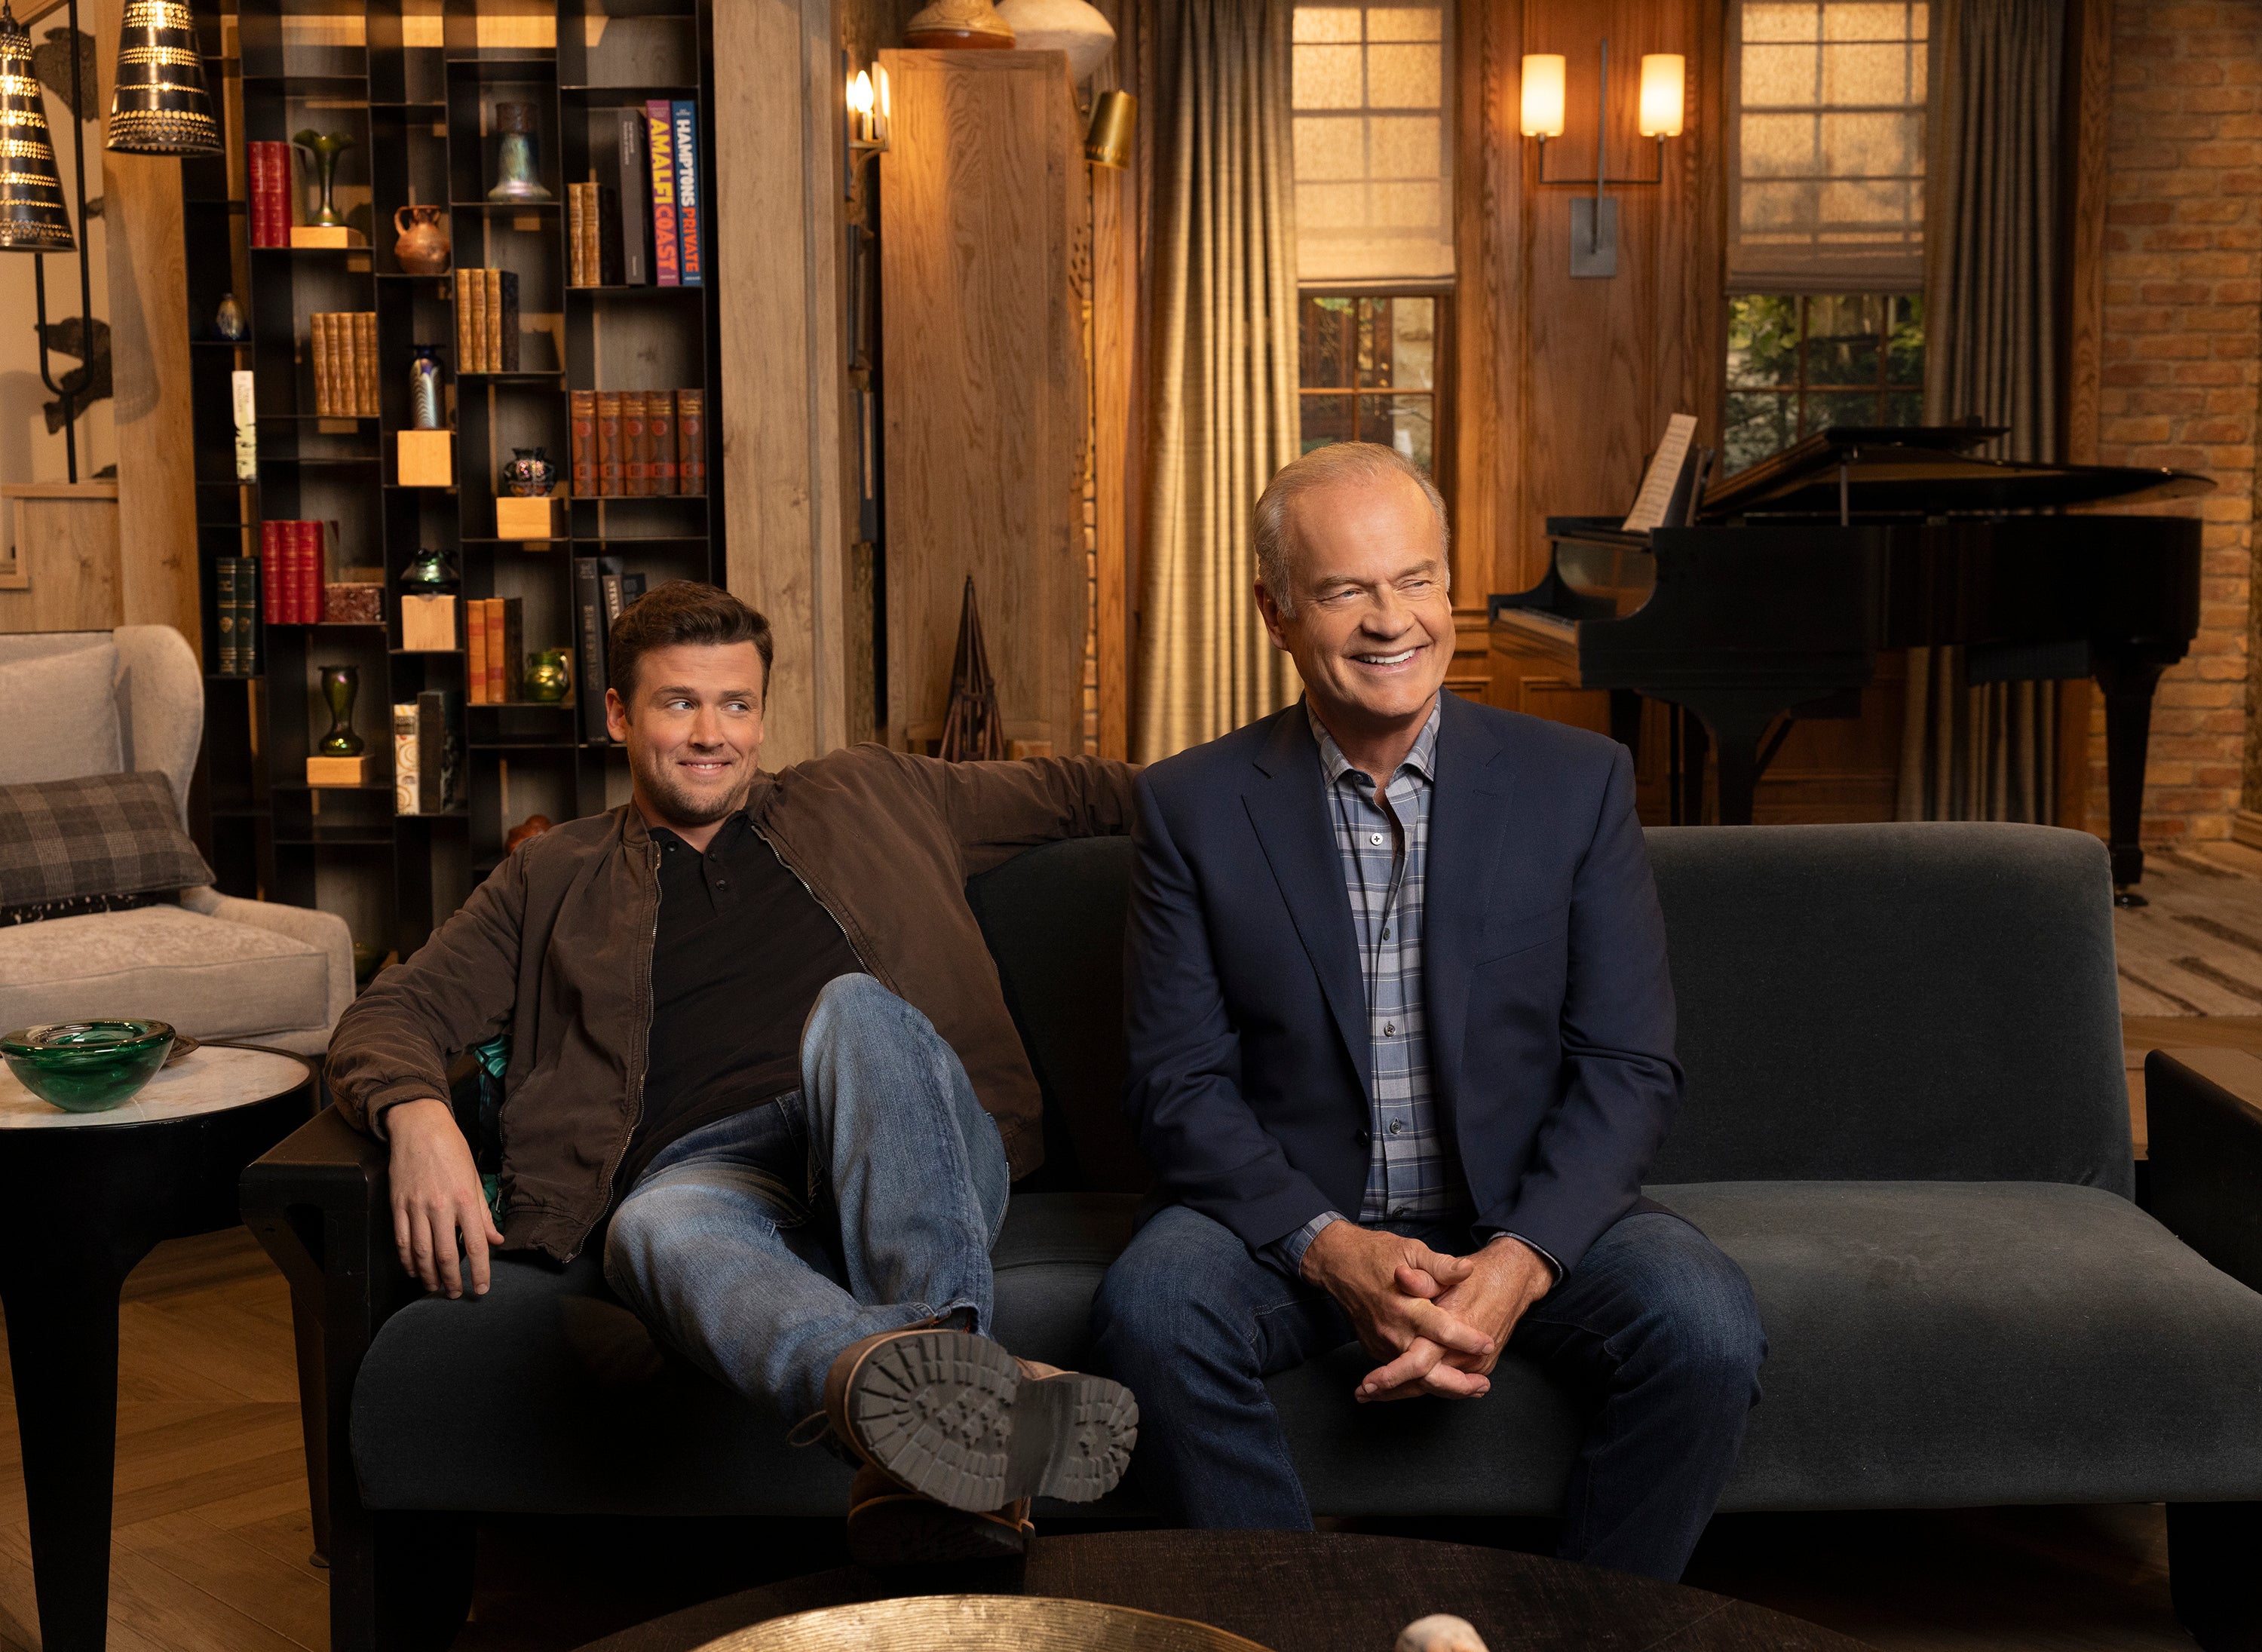 The Frasier reboot is dismal and unfunny. We need more shows like it ...